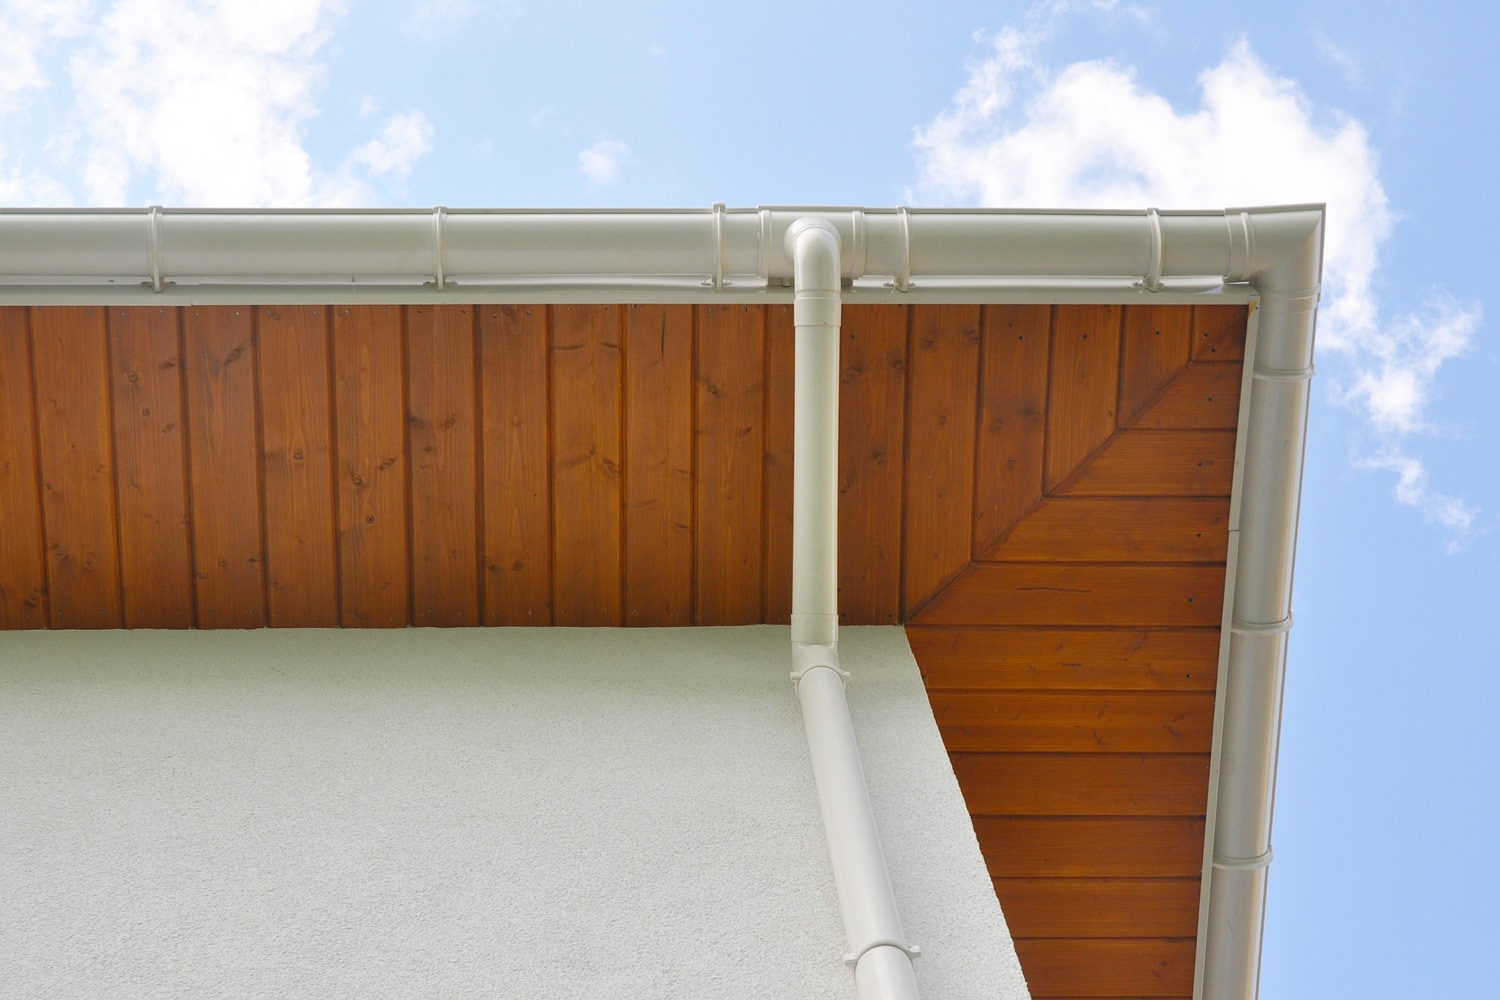 Close up on New Rain Gutter, Downspout, Soffit Board, Fascia Board Installation Against Blue Sky.